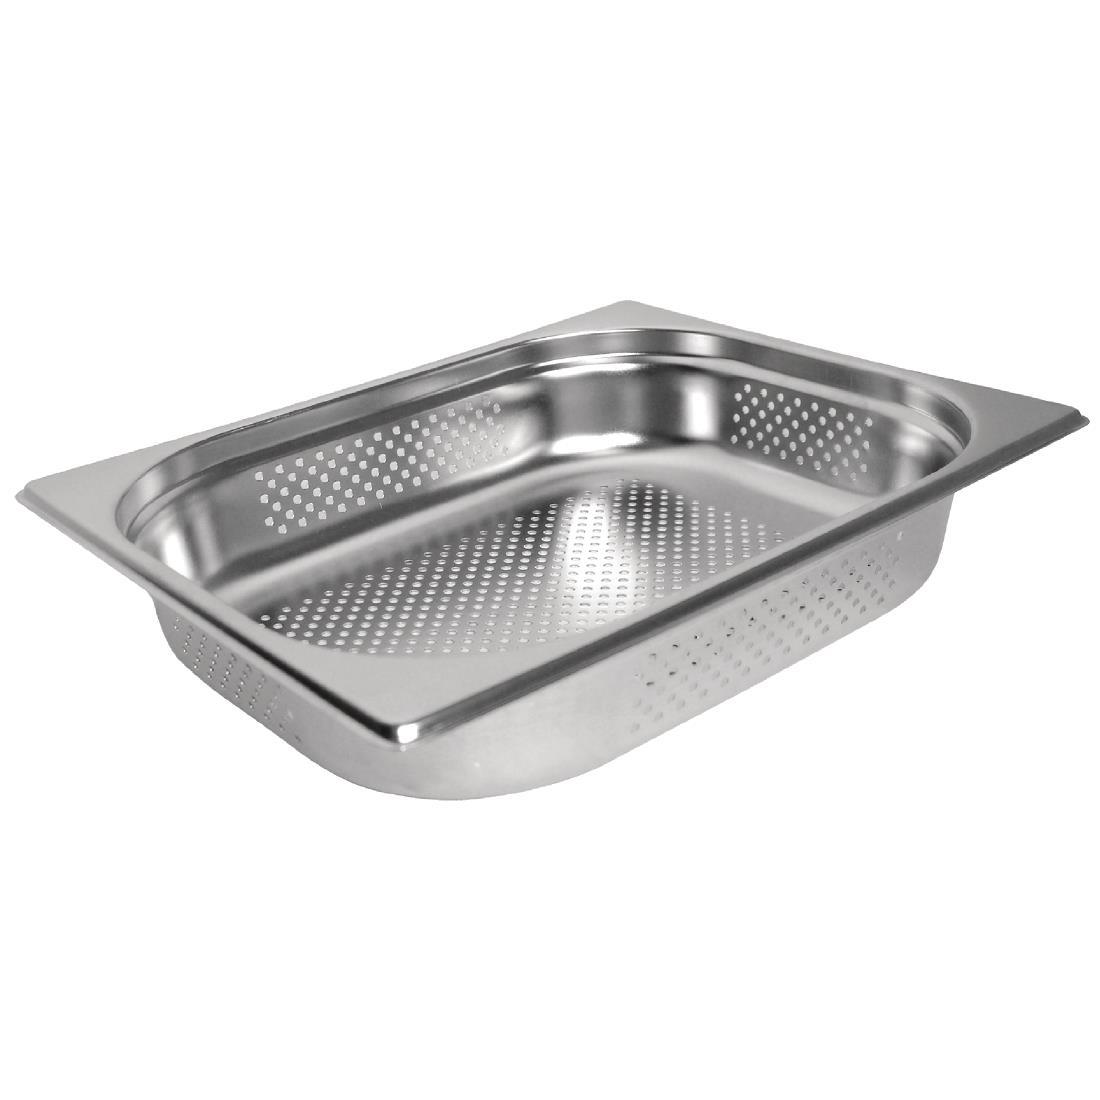 Vogue Stainless Steel Perforated 1/2 Gastronorm Pan 150mm - K846  - 1